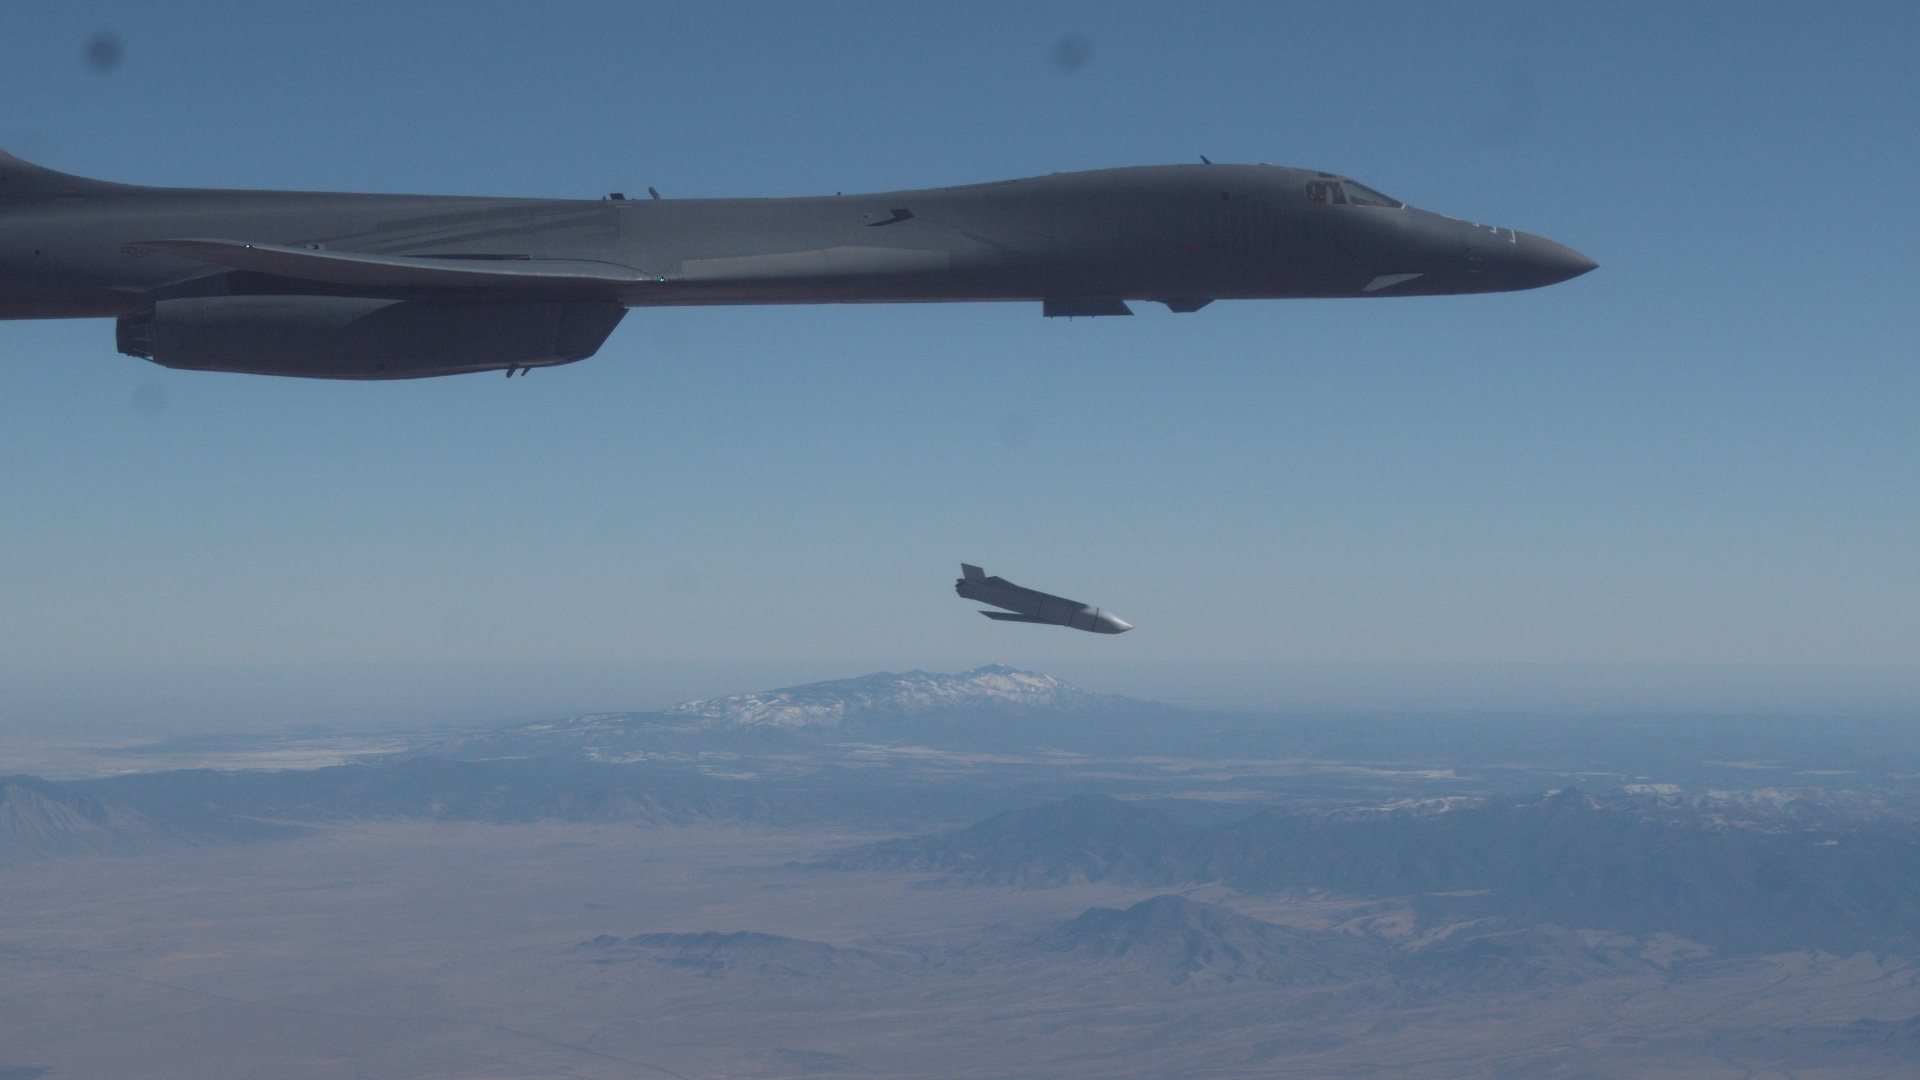 The B-1B launched a cruise missile Hypersonic could be next.